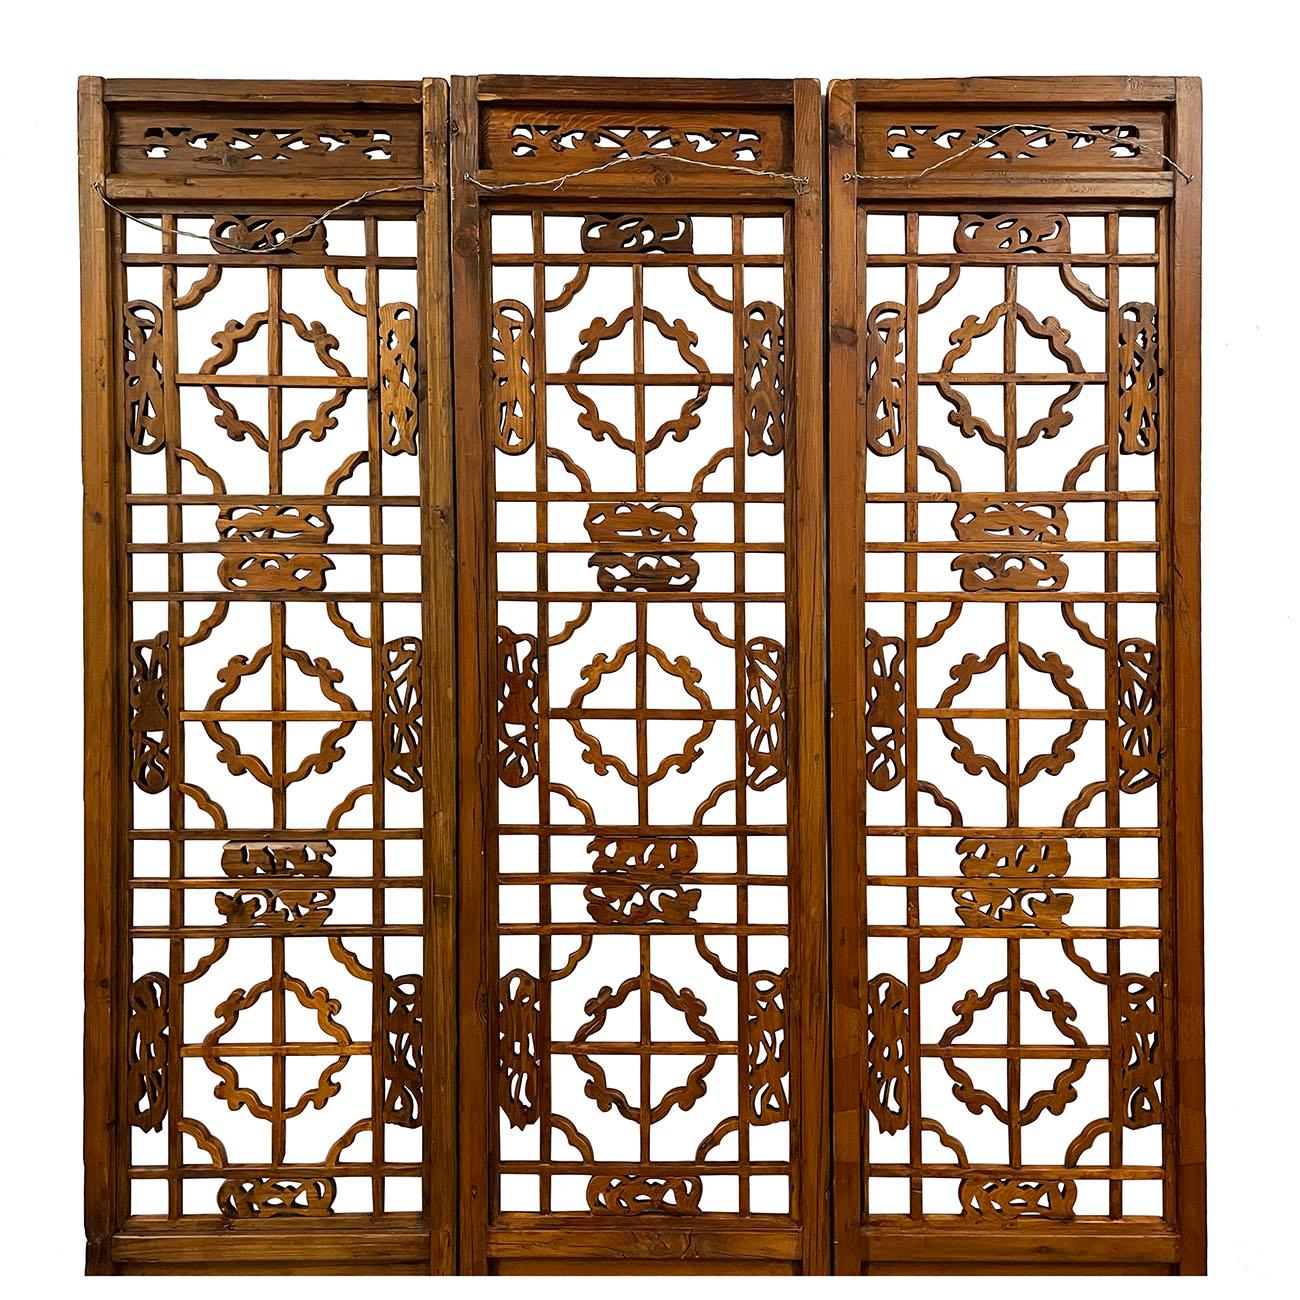 Late 19th Century Antique Chinese Handcrafted 3 Panel Wooden Screen/Room Divider For Sale 7